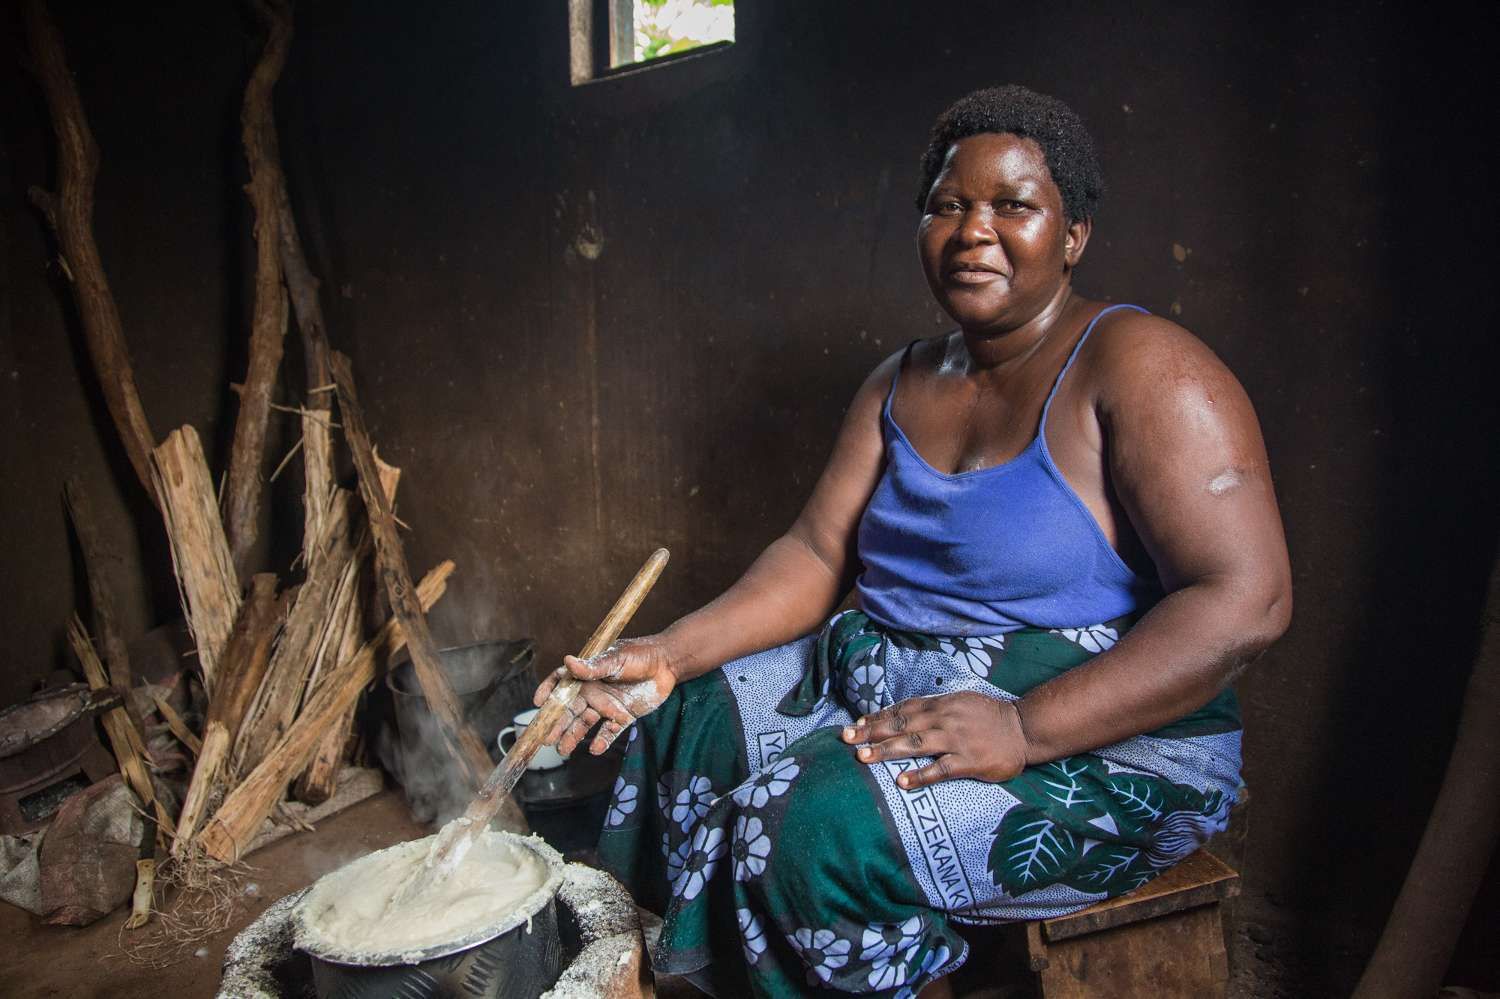 Rose Kandodo, from Nessa near Mulanje, has just finished cooking the staple food Nsima. Image by Nathalie Bertrams. Malawi, 2017.